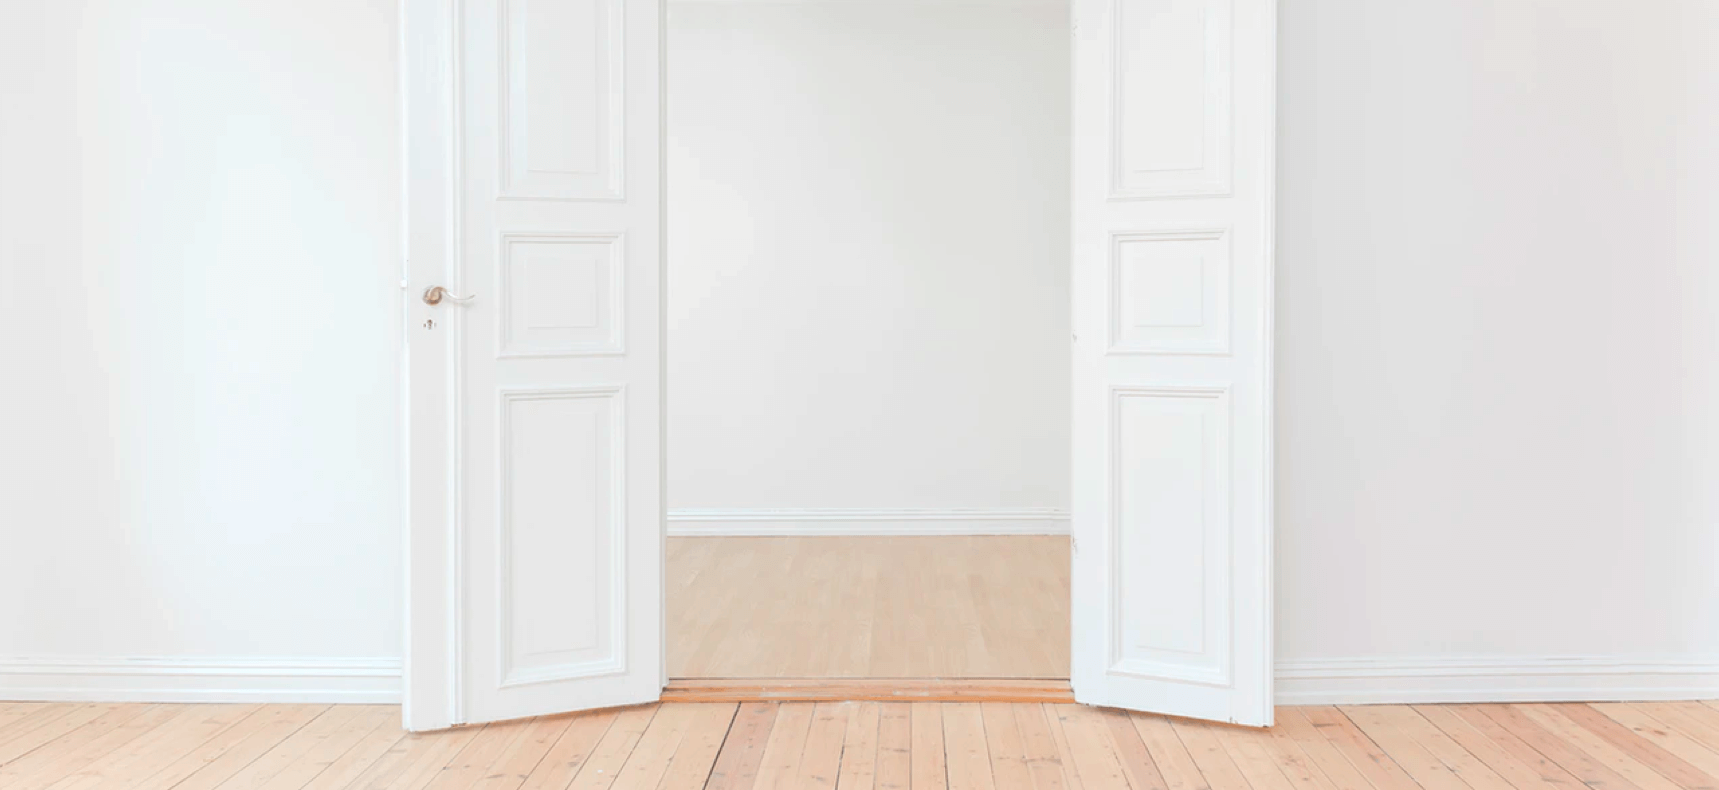 A pair of elegant white doors opened to reveal a warm, inviting wooden floor, symbolizing a welcoming entrance.